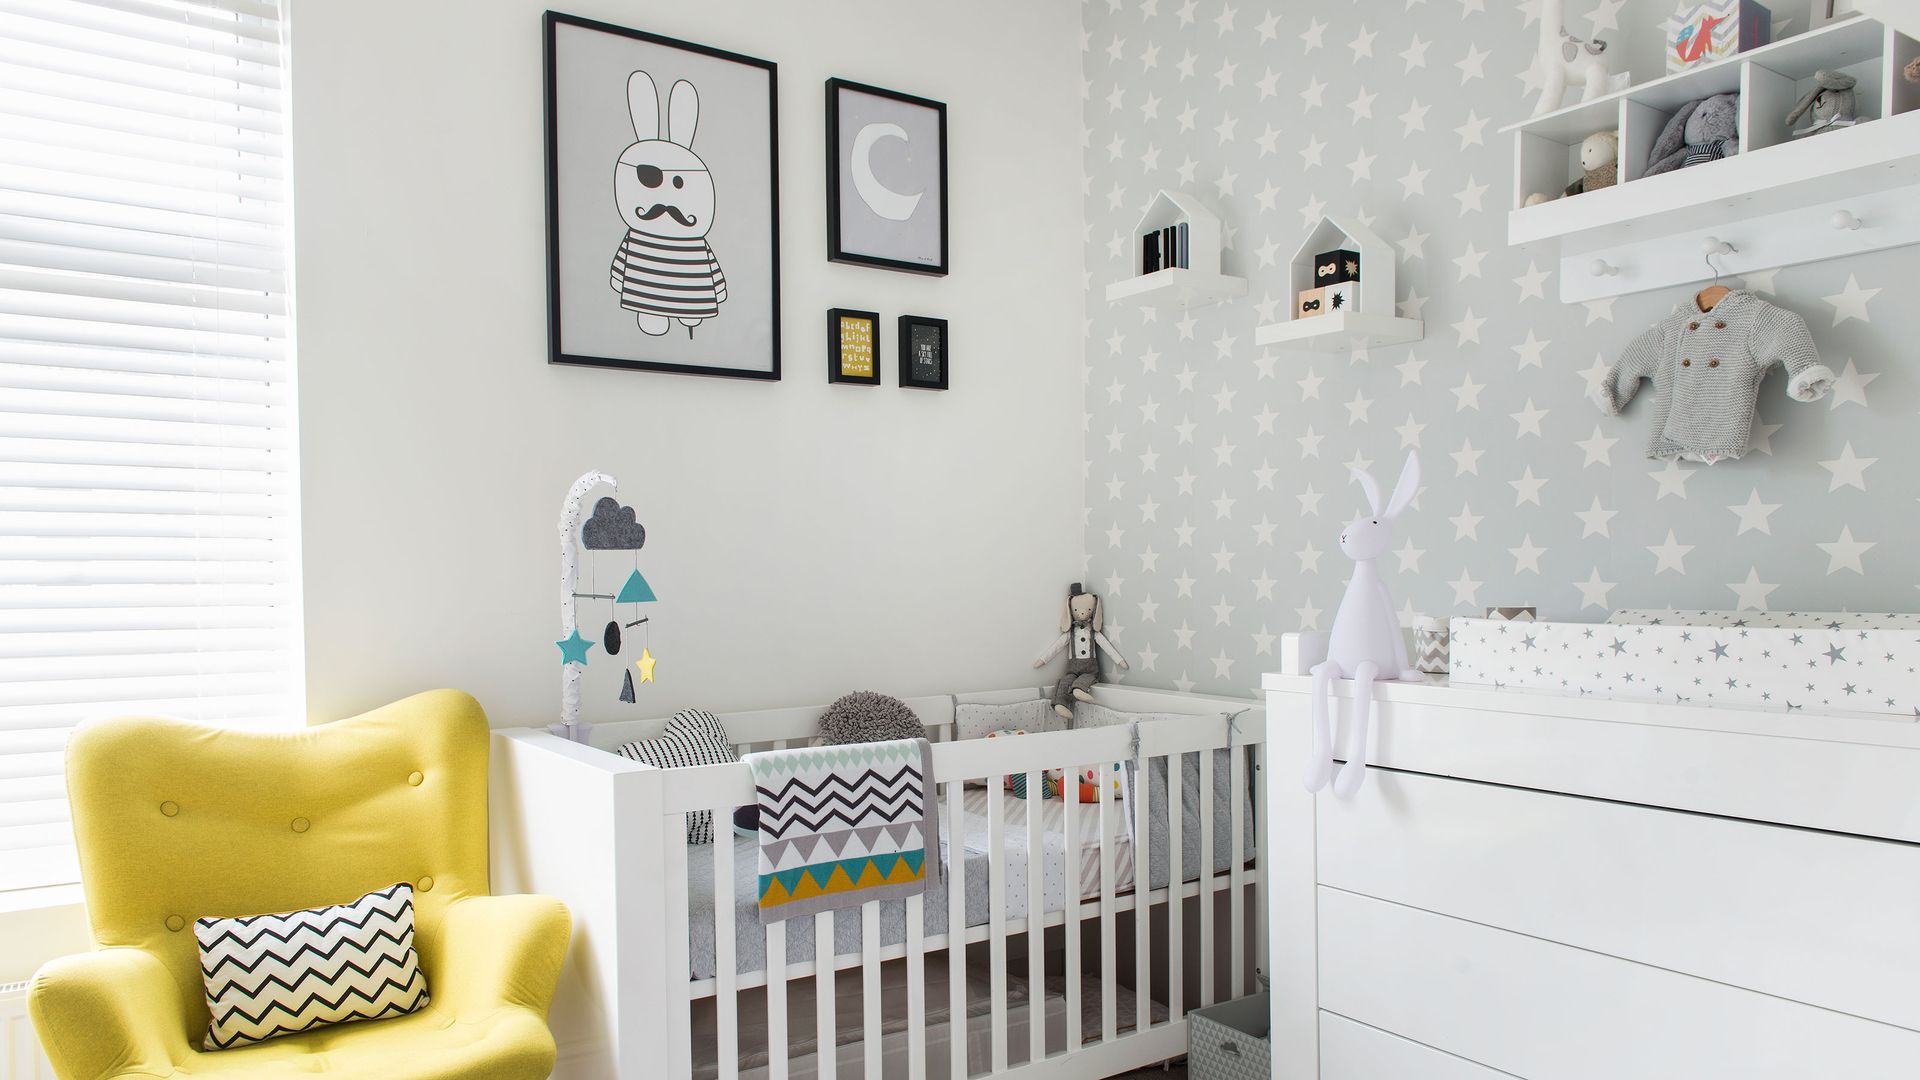 <p>                     There is so much to organise when you're getting ready to meet a new addition to your family. One area where you have a chance to get creative and enjoy yourself is with the nursery.                   </p>                                      <p>                     Unlike working out how many nappies you need to get stocked up with, kids rooms are an opportunity to have a bit of fun. At the end of the day, decorating a nursery is one of the chances you have to imagine this exciting new step of your life.                   </p>                                      <p>                     Your baby room will be a space both you and your child spend a lot of time in. First of all for night feeds and naps, and then for play and tummy time as they start to explore the world.                   </p>                                      <p>                     'My number one advice is you don't have to spend a lot of money,' says Catherine Dal, Founder, CatDal Interiors, 'but just some time and thought to create a dreamy atmospheric environment for your treasured little ones.'                   </p>